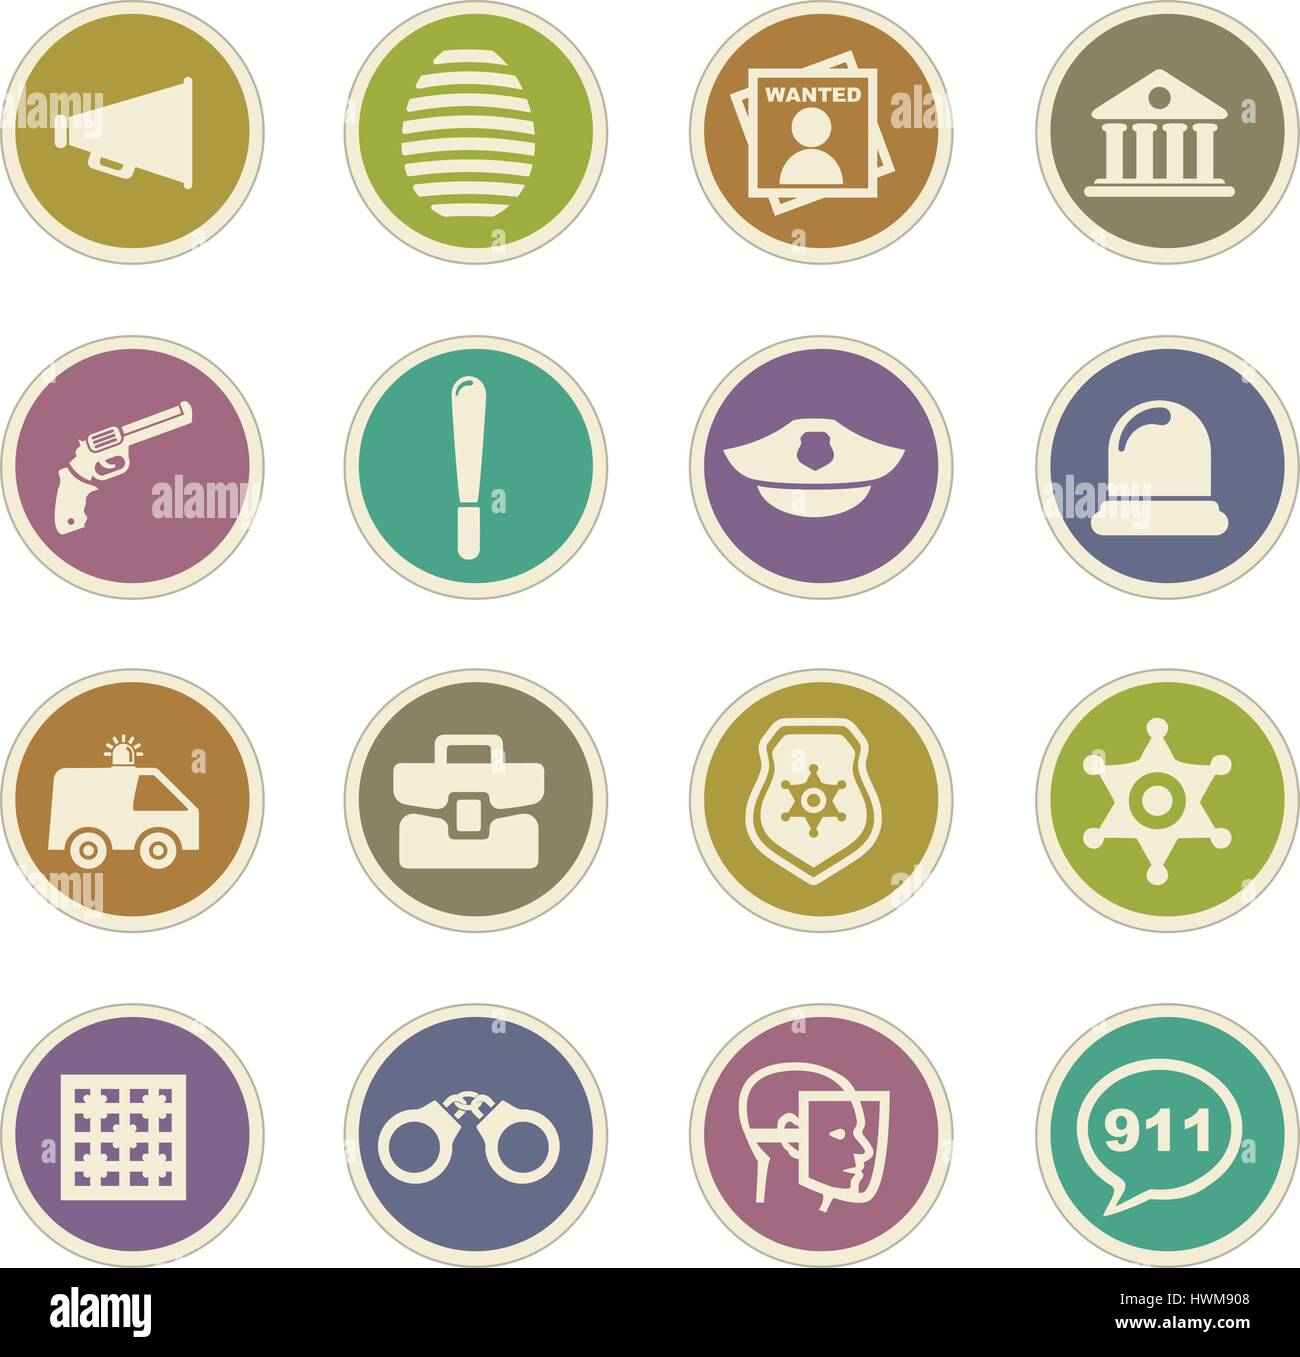 Police icon set for web sites and user interface Stock Vector